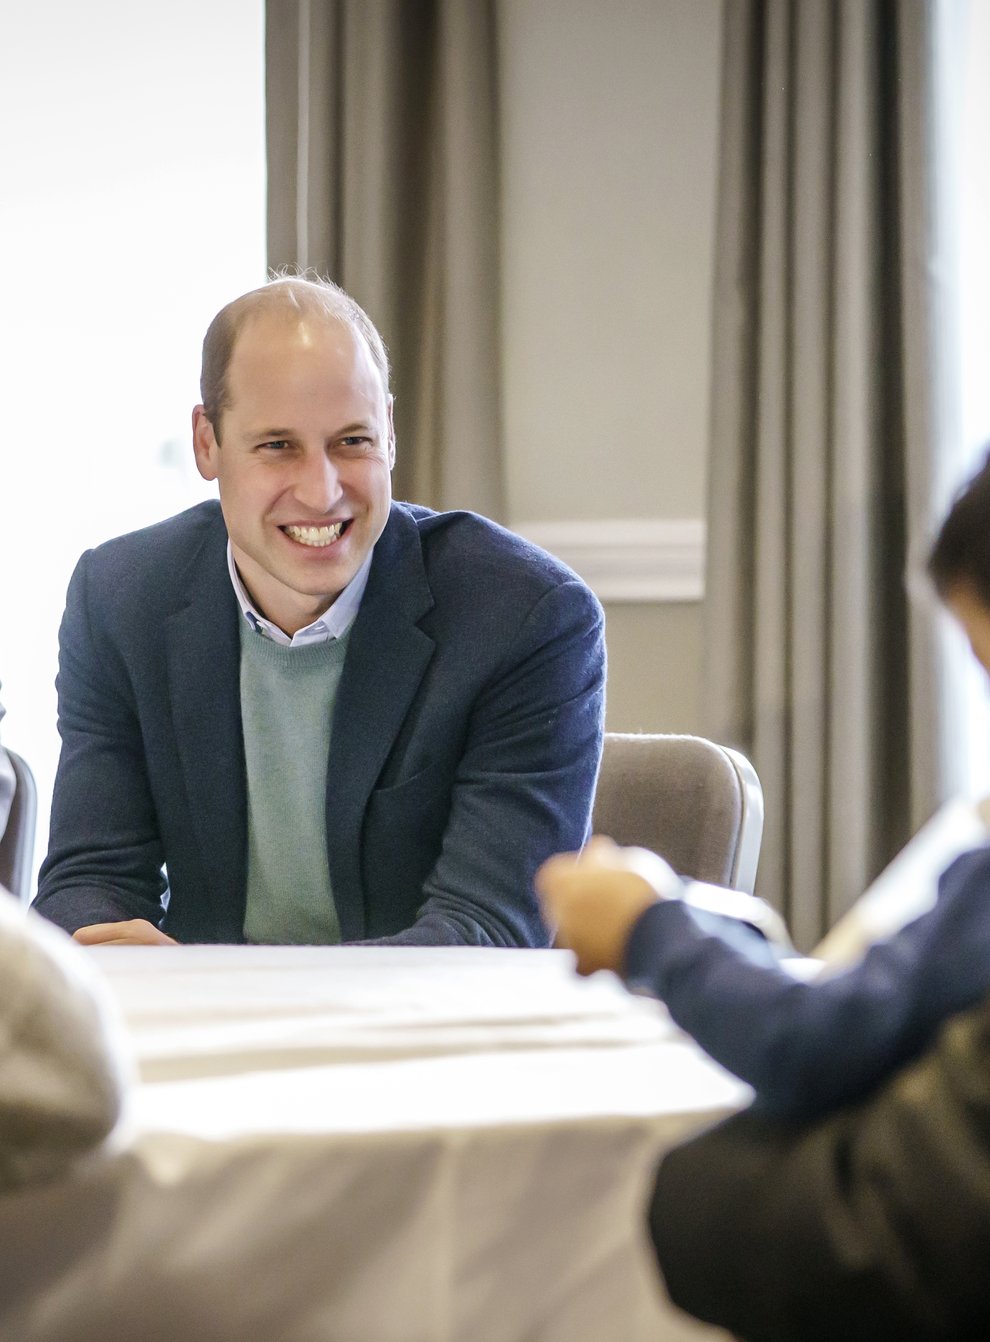 The Duke of Cambridge speaks to refugees during a visit to a local hotel in Leeds, which is being used to accommodate refugees evacuated from Afghanistan (PA)